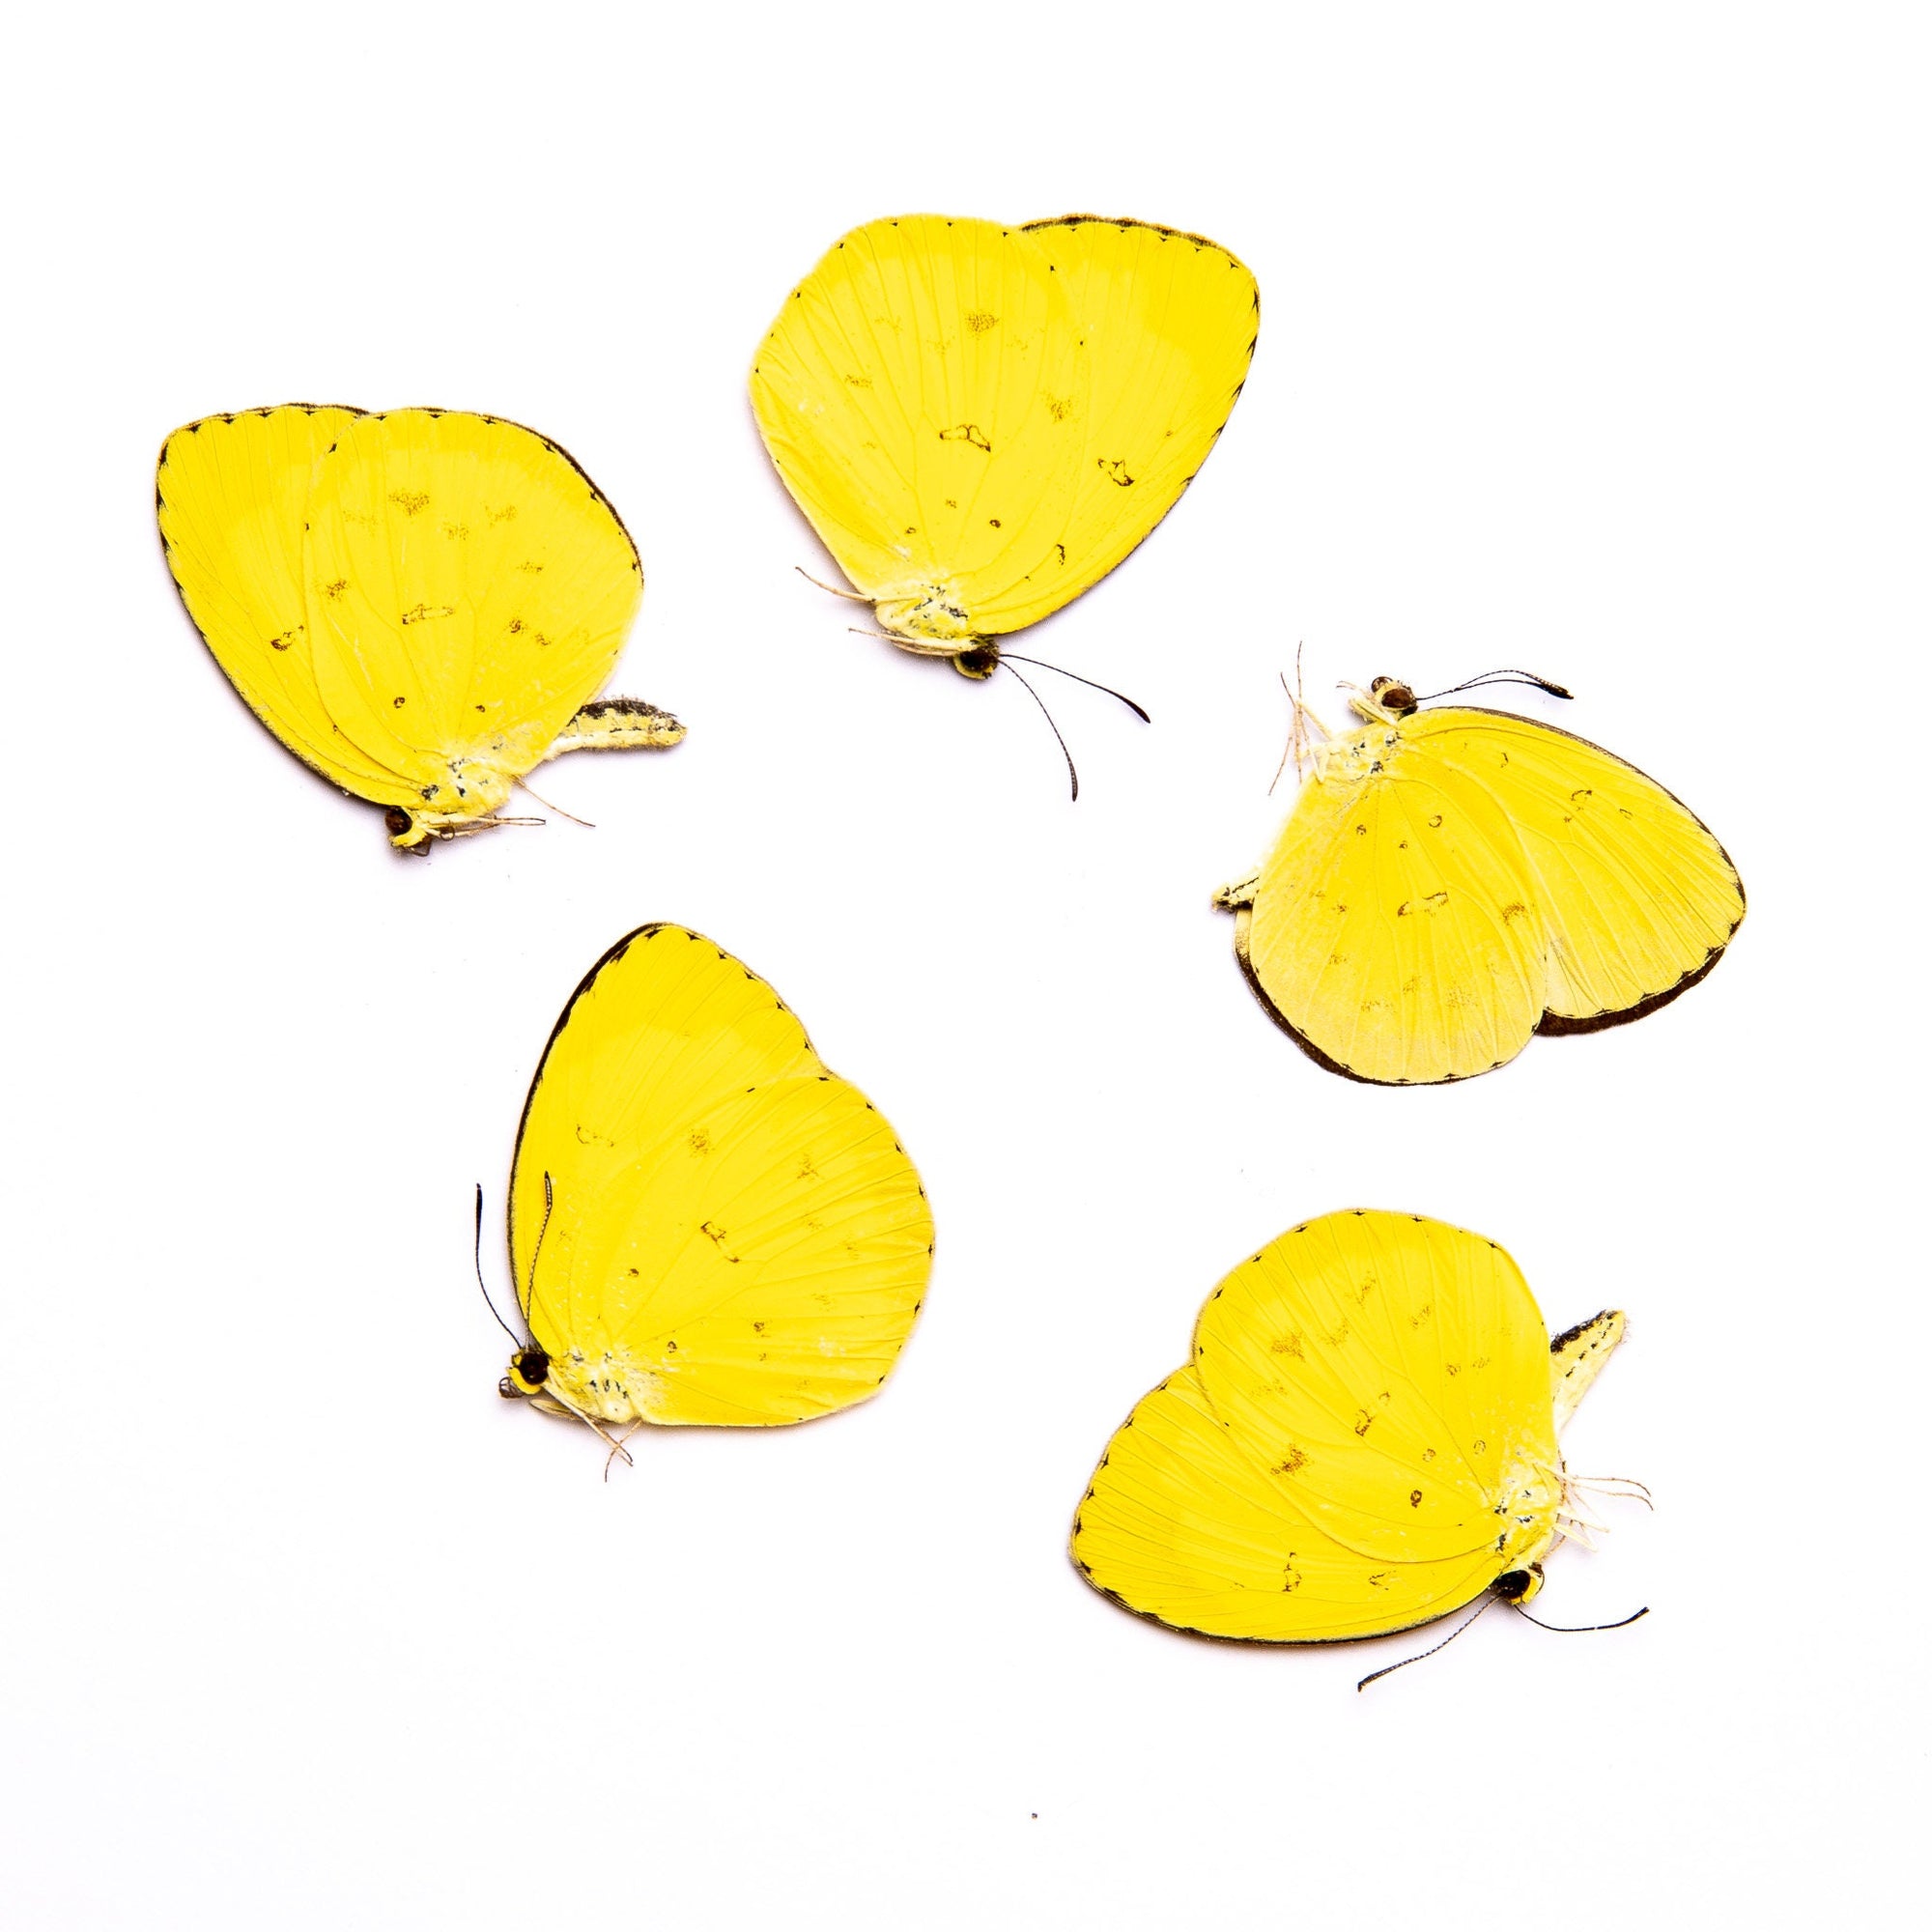 FIVE (5) Eurema hecabe | A1 Real Dry-Preserved Butterflies | Unmounted Entomology Taxidermy Specimens